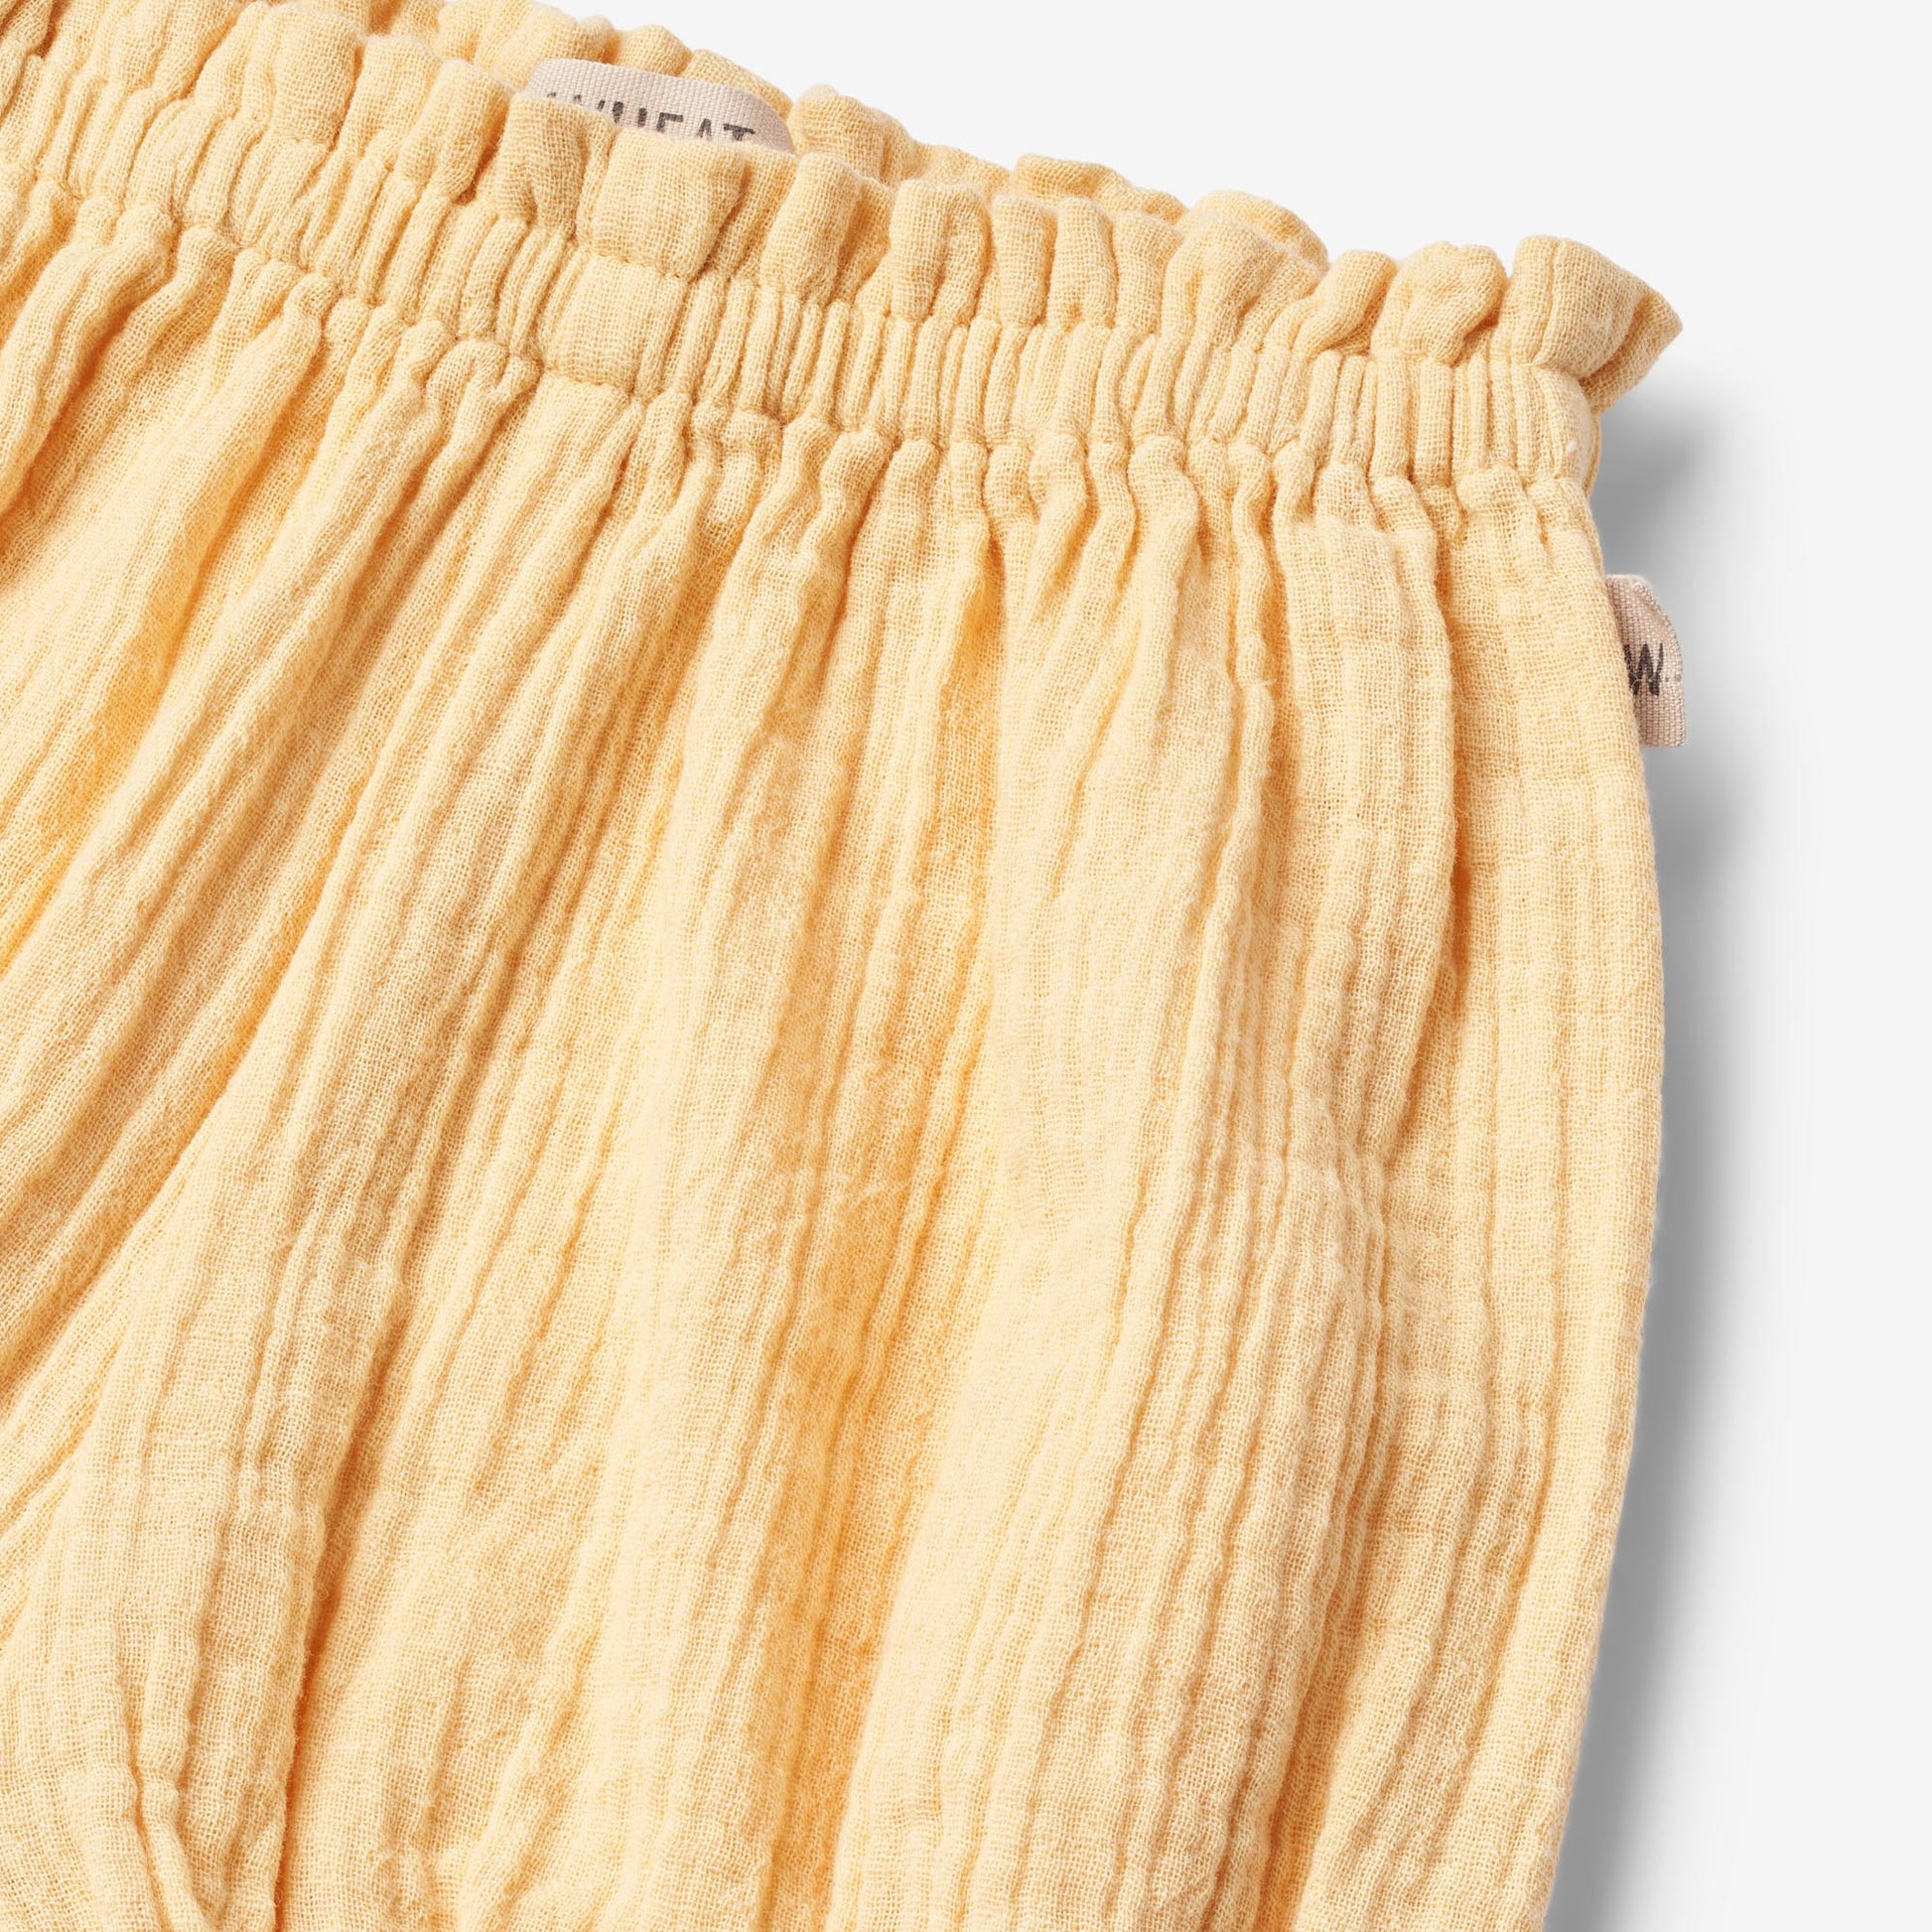 Wheat 'Angie' Baby Nappy Pants - Pale Apricot